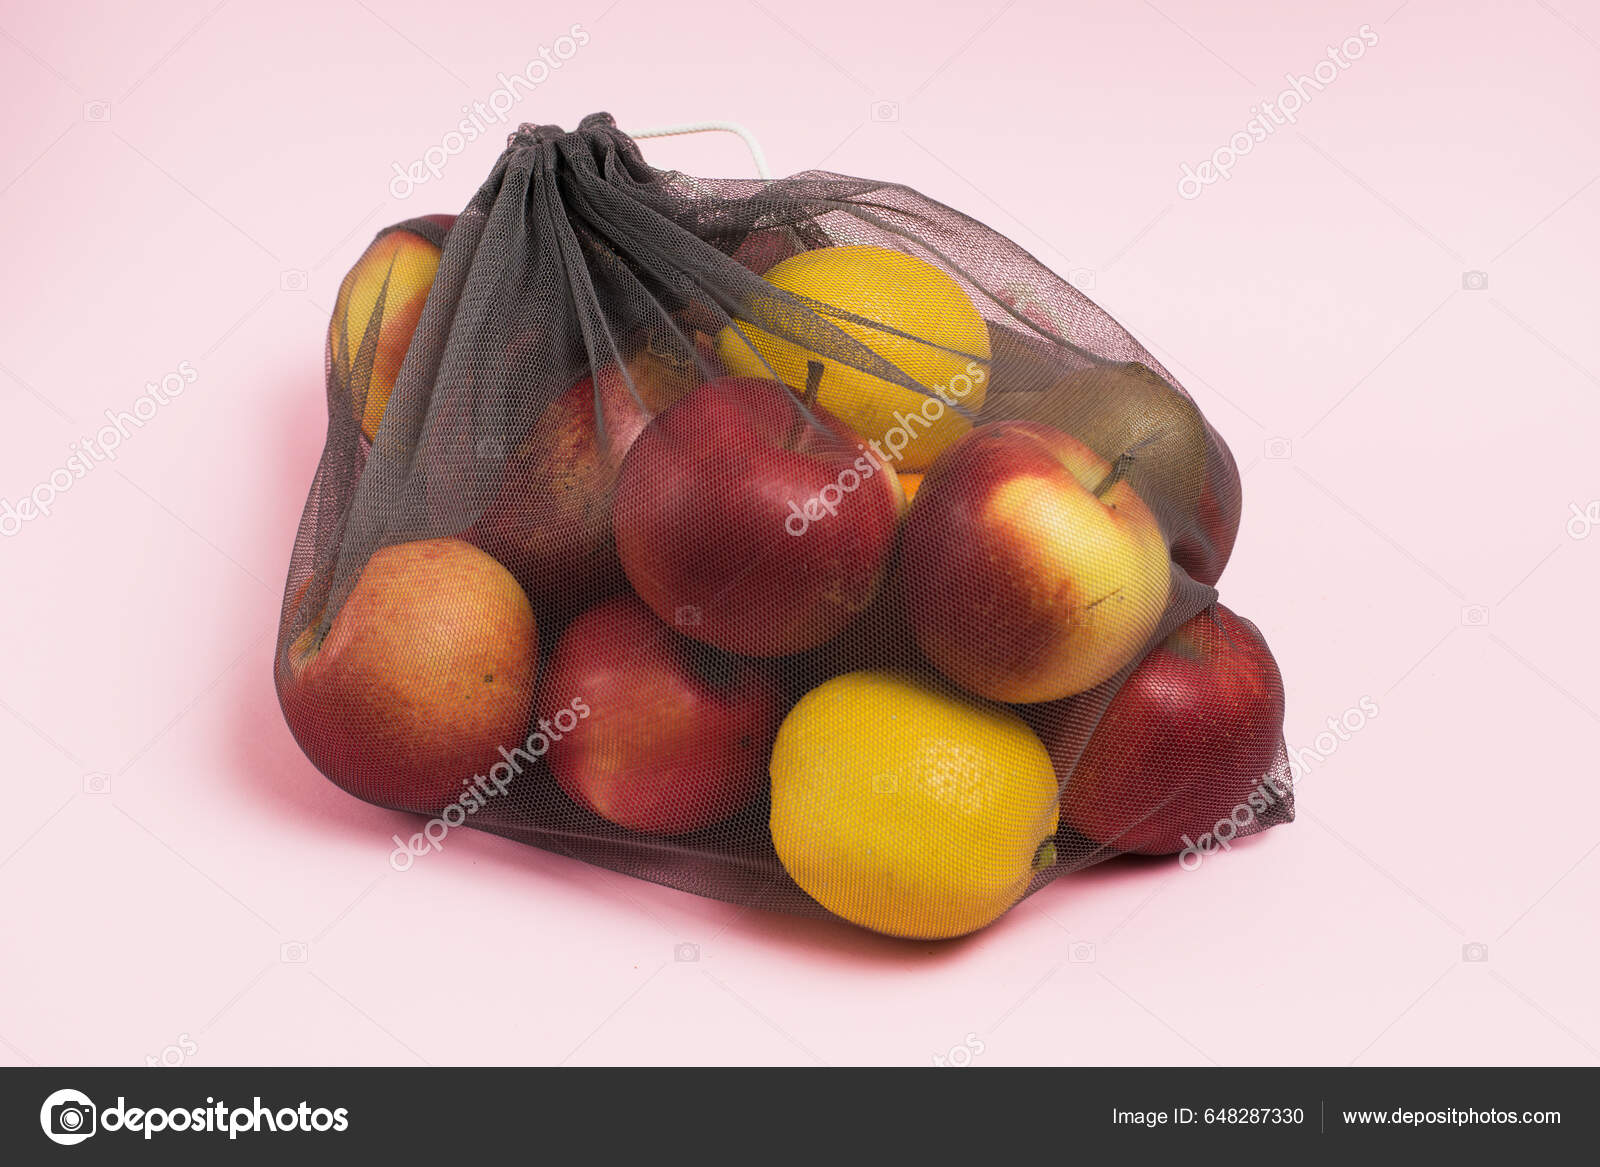 Bag of apples Stock Photos Royalty Free Bag of apples Images   Depositphotos